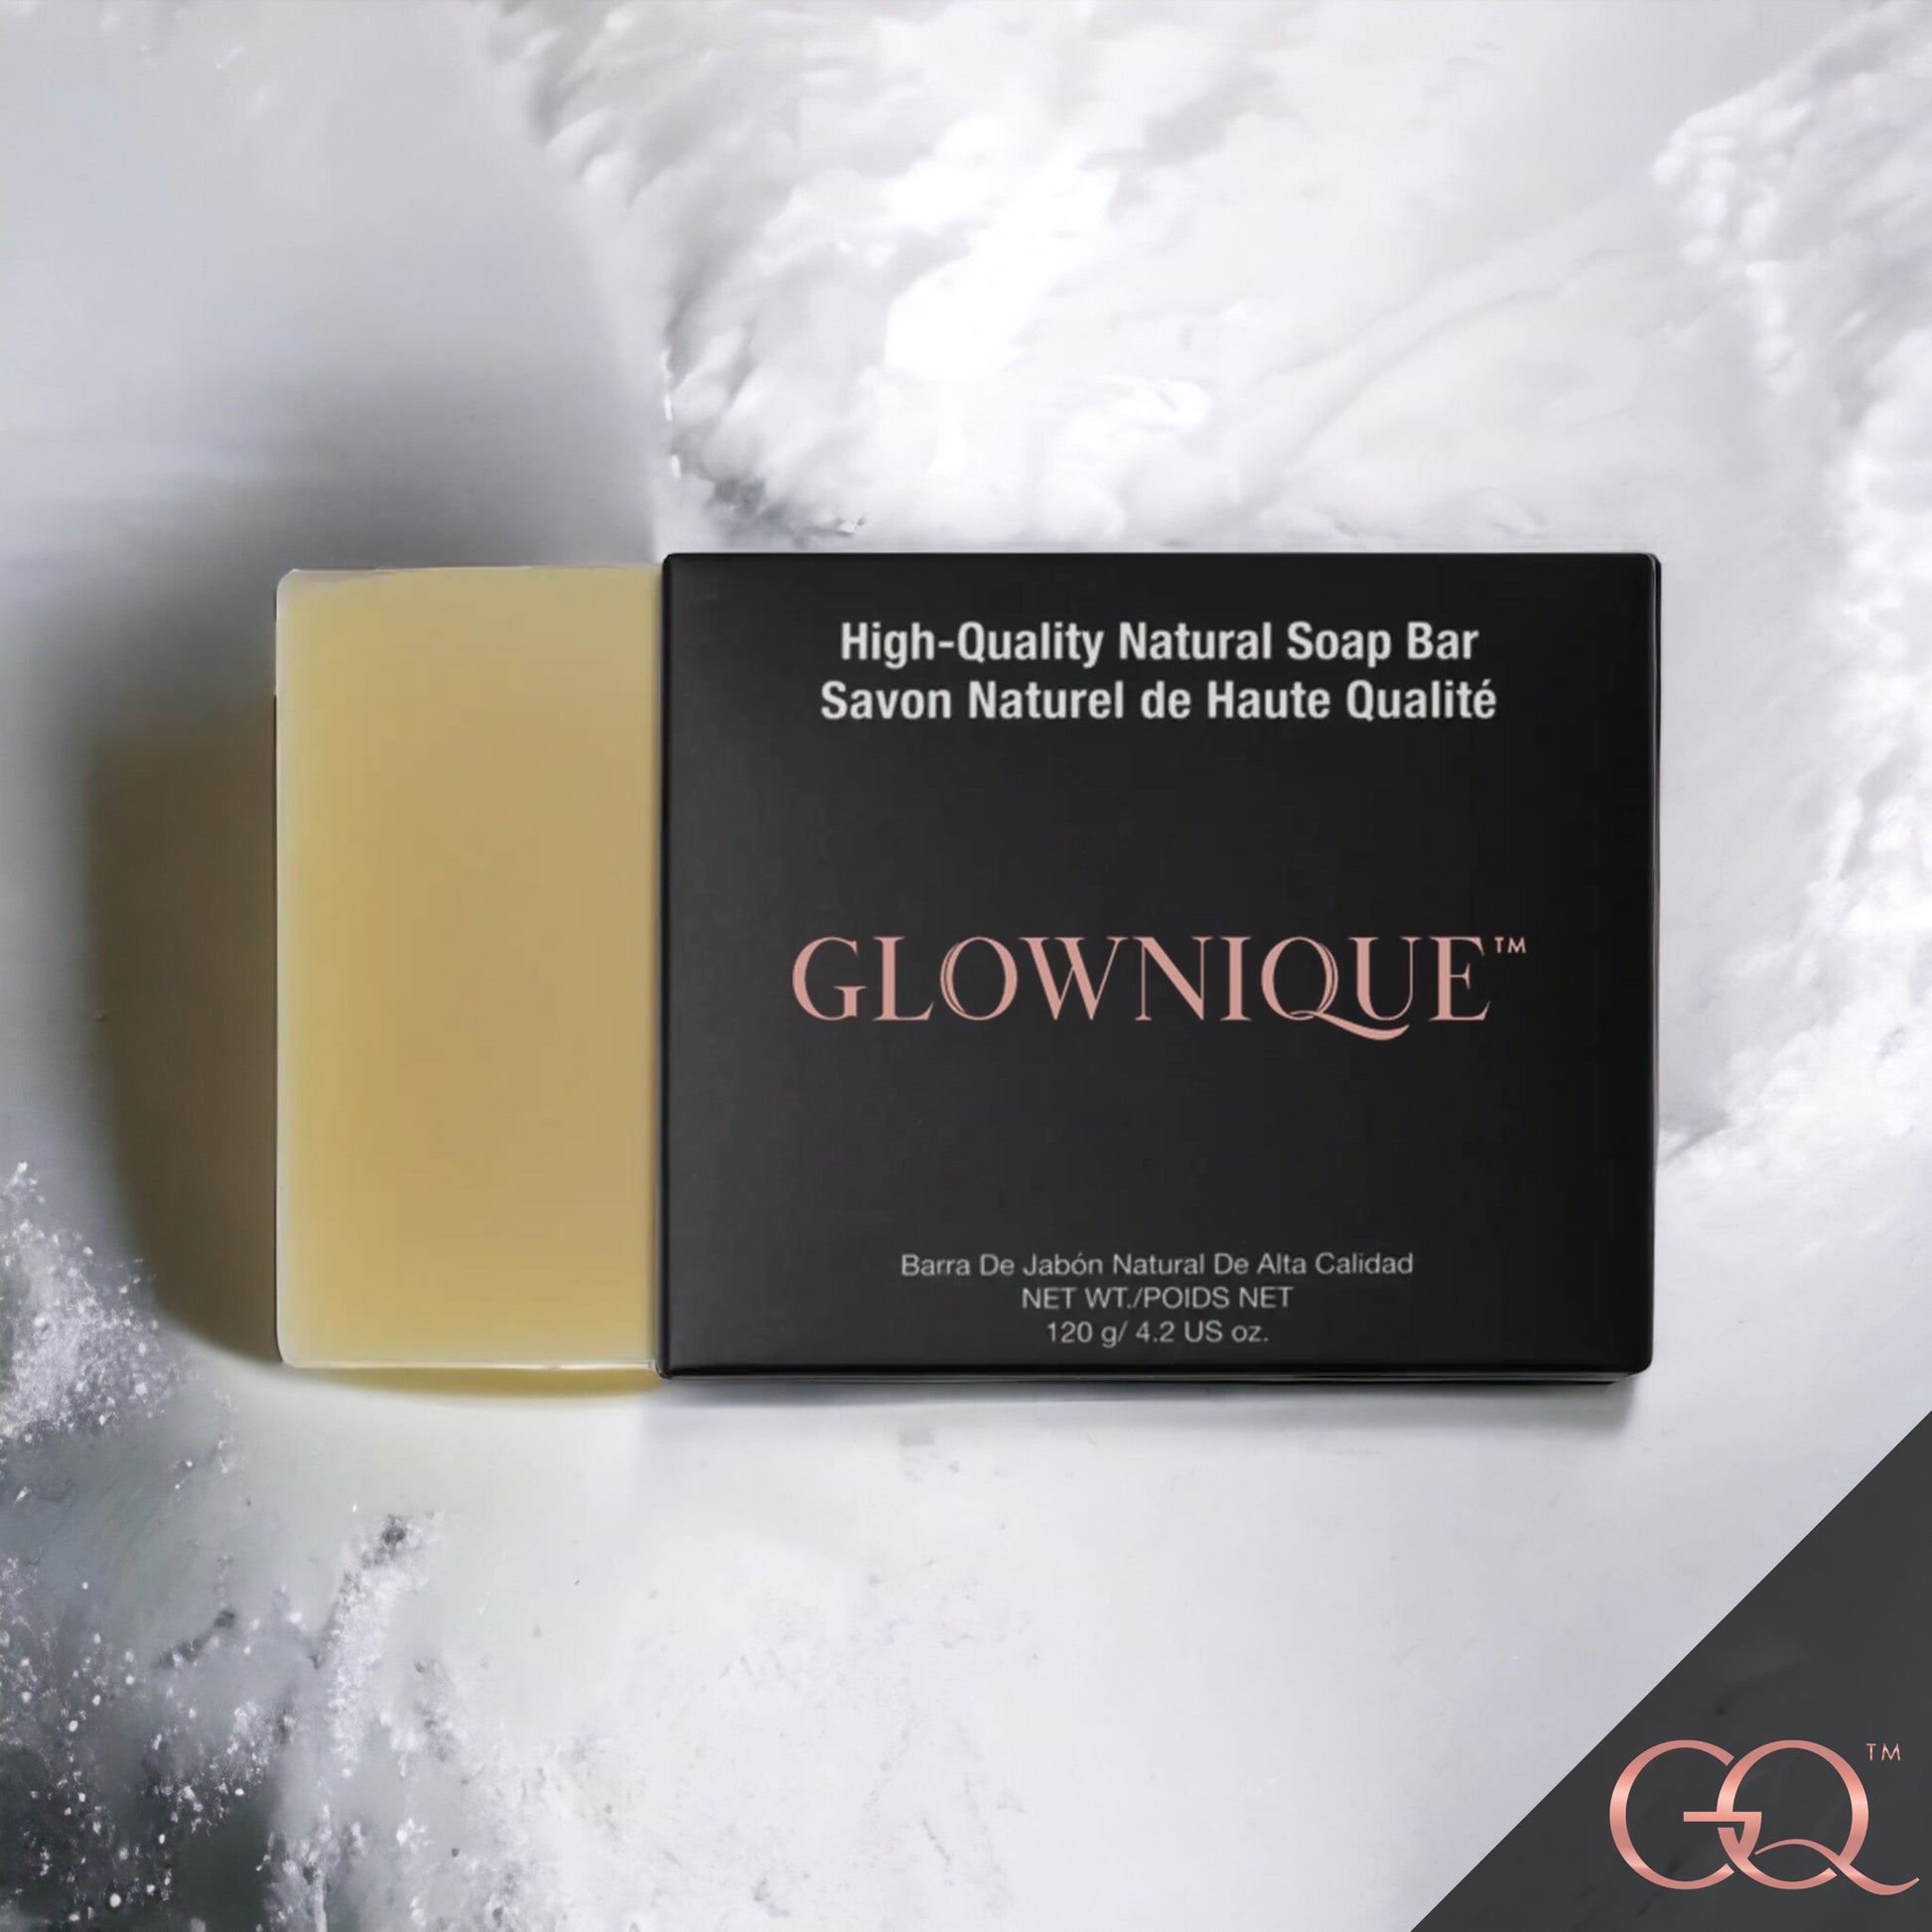 Natural Organic Coconutty Soap | GLOWNIQUE